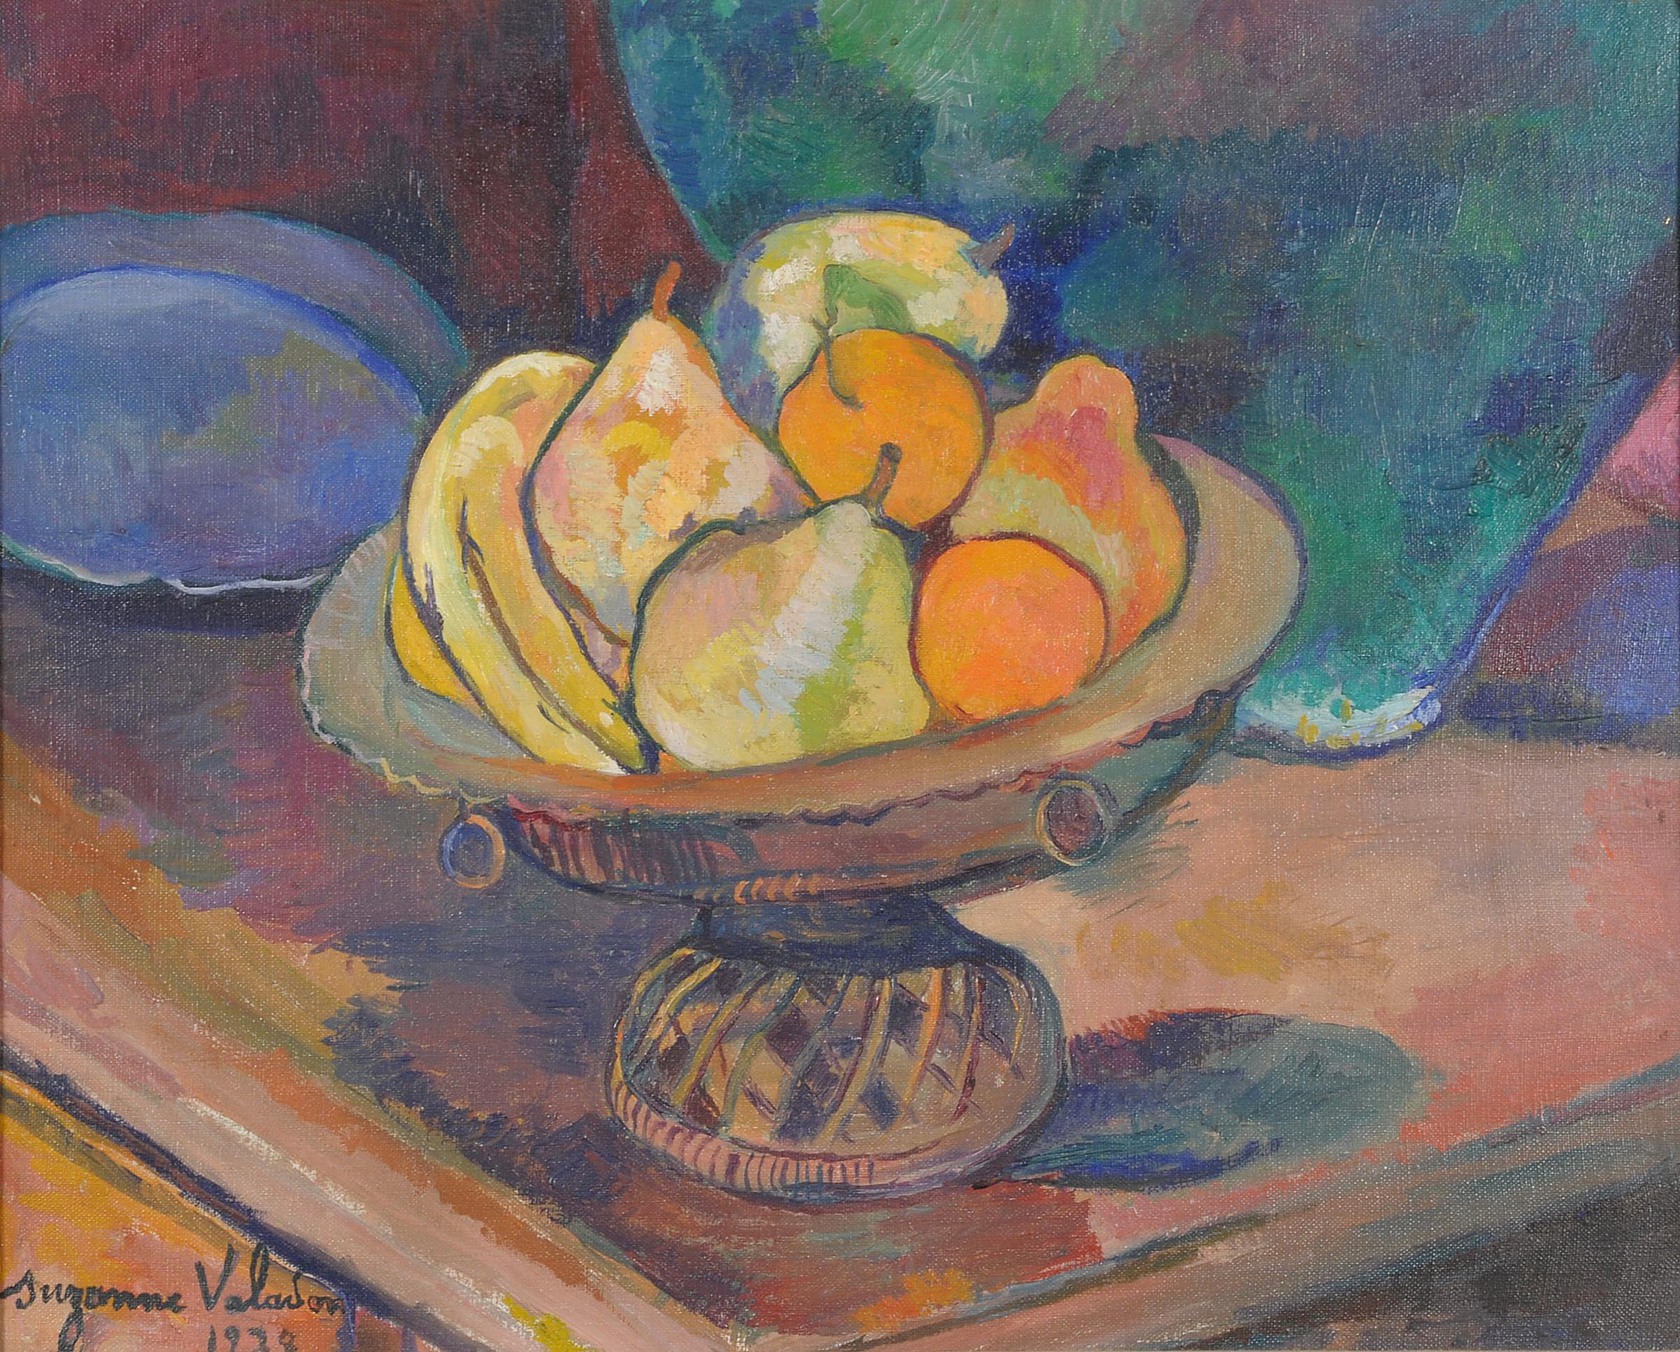 Painting of a bowl of pears, bananas, and citrus fruits